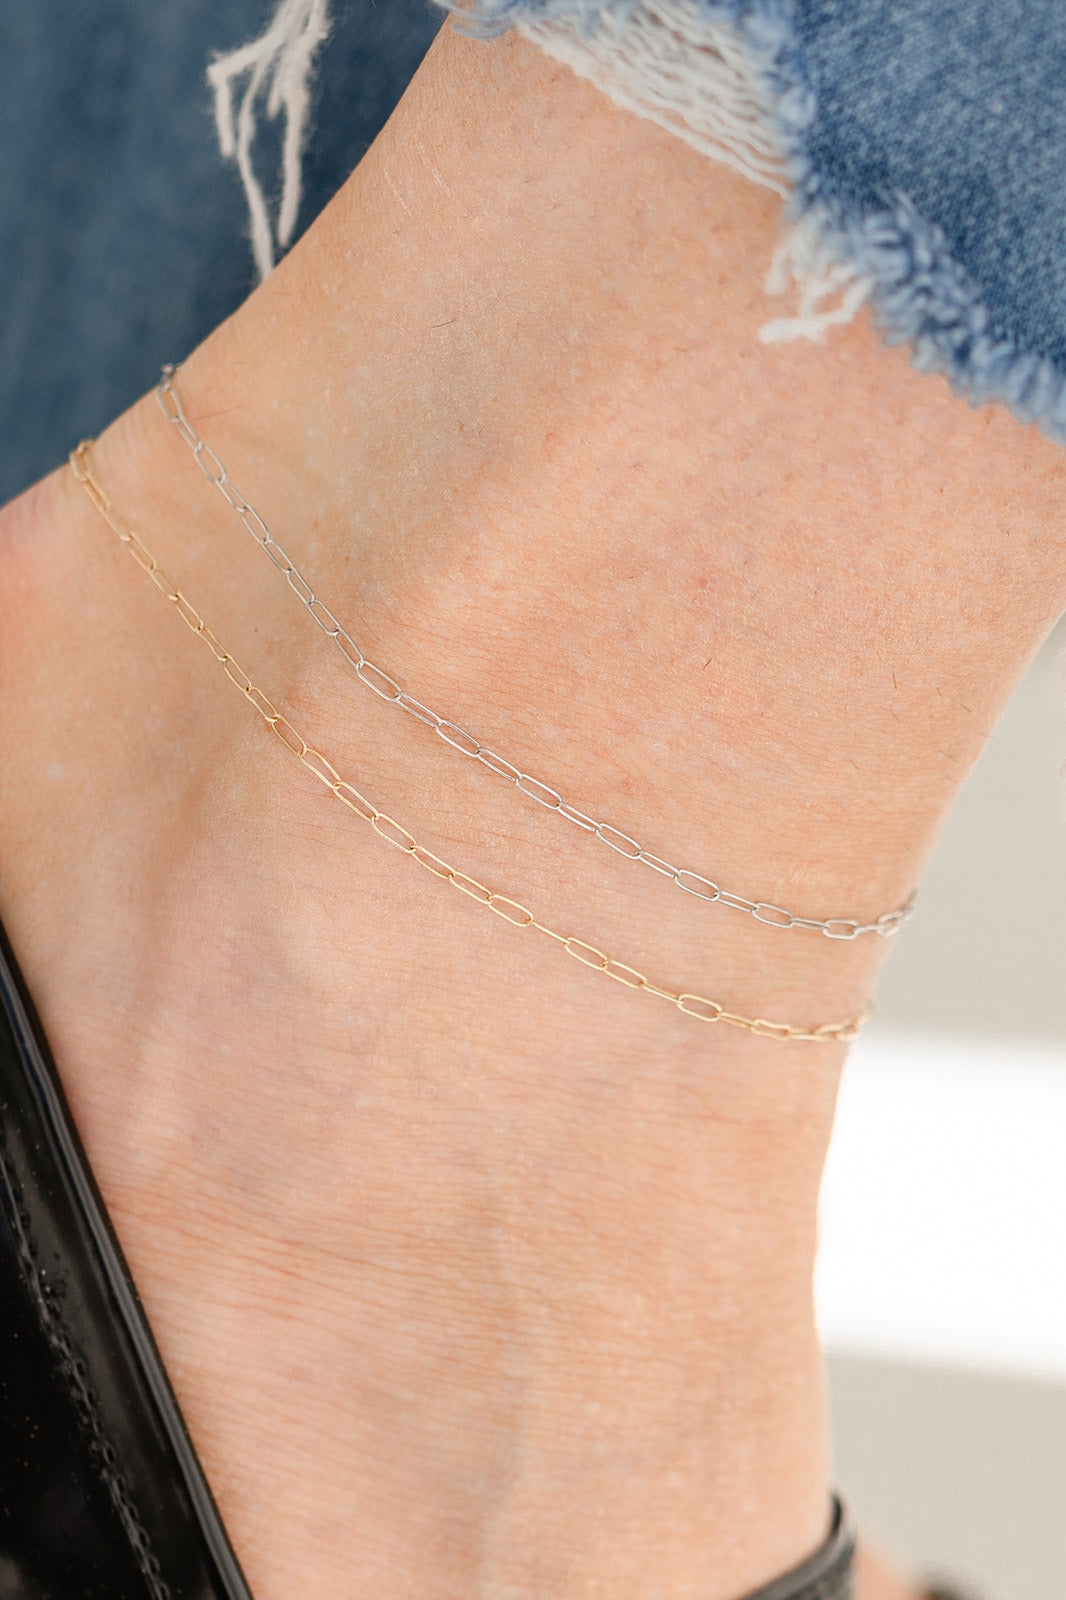 Permanent White Gold Chain Anklet